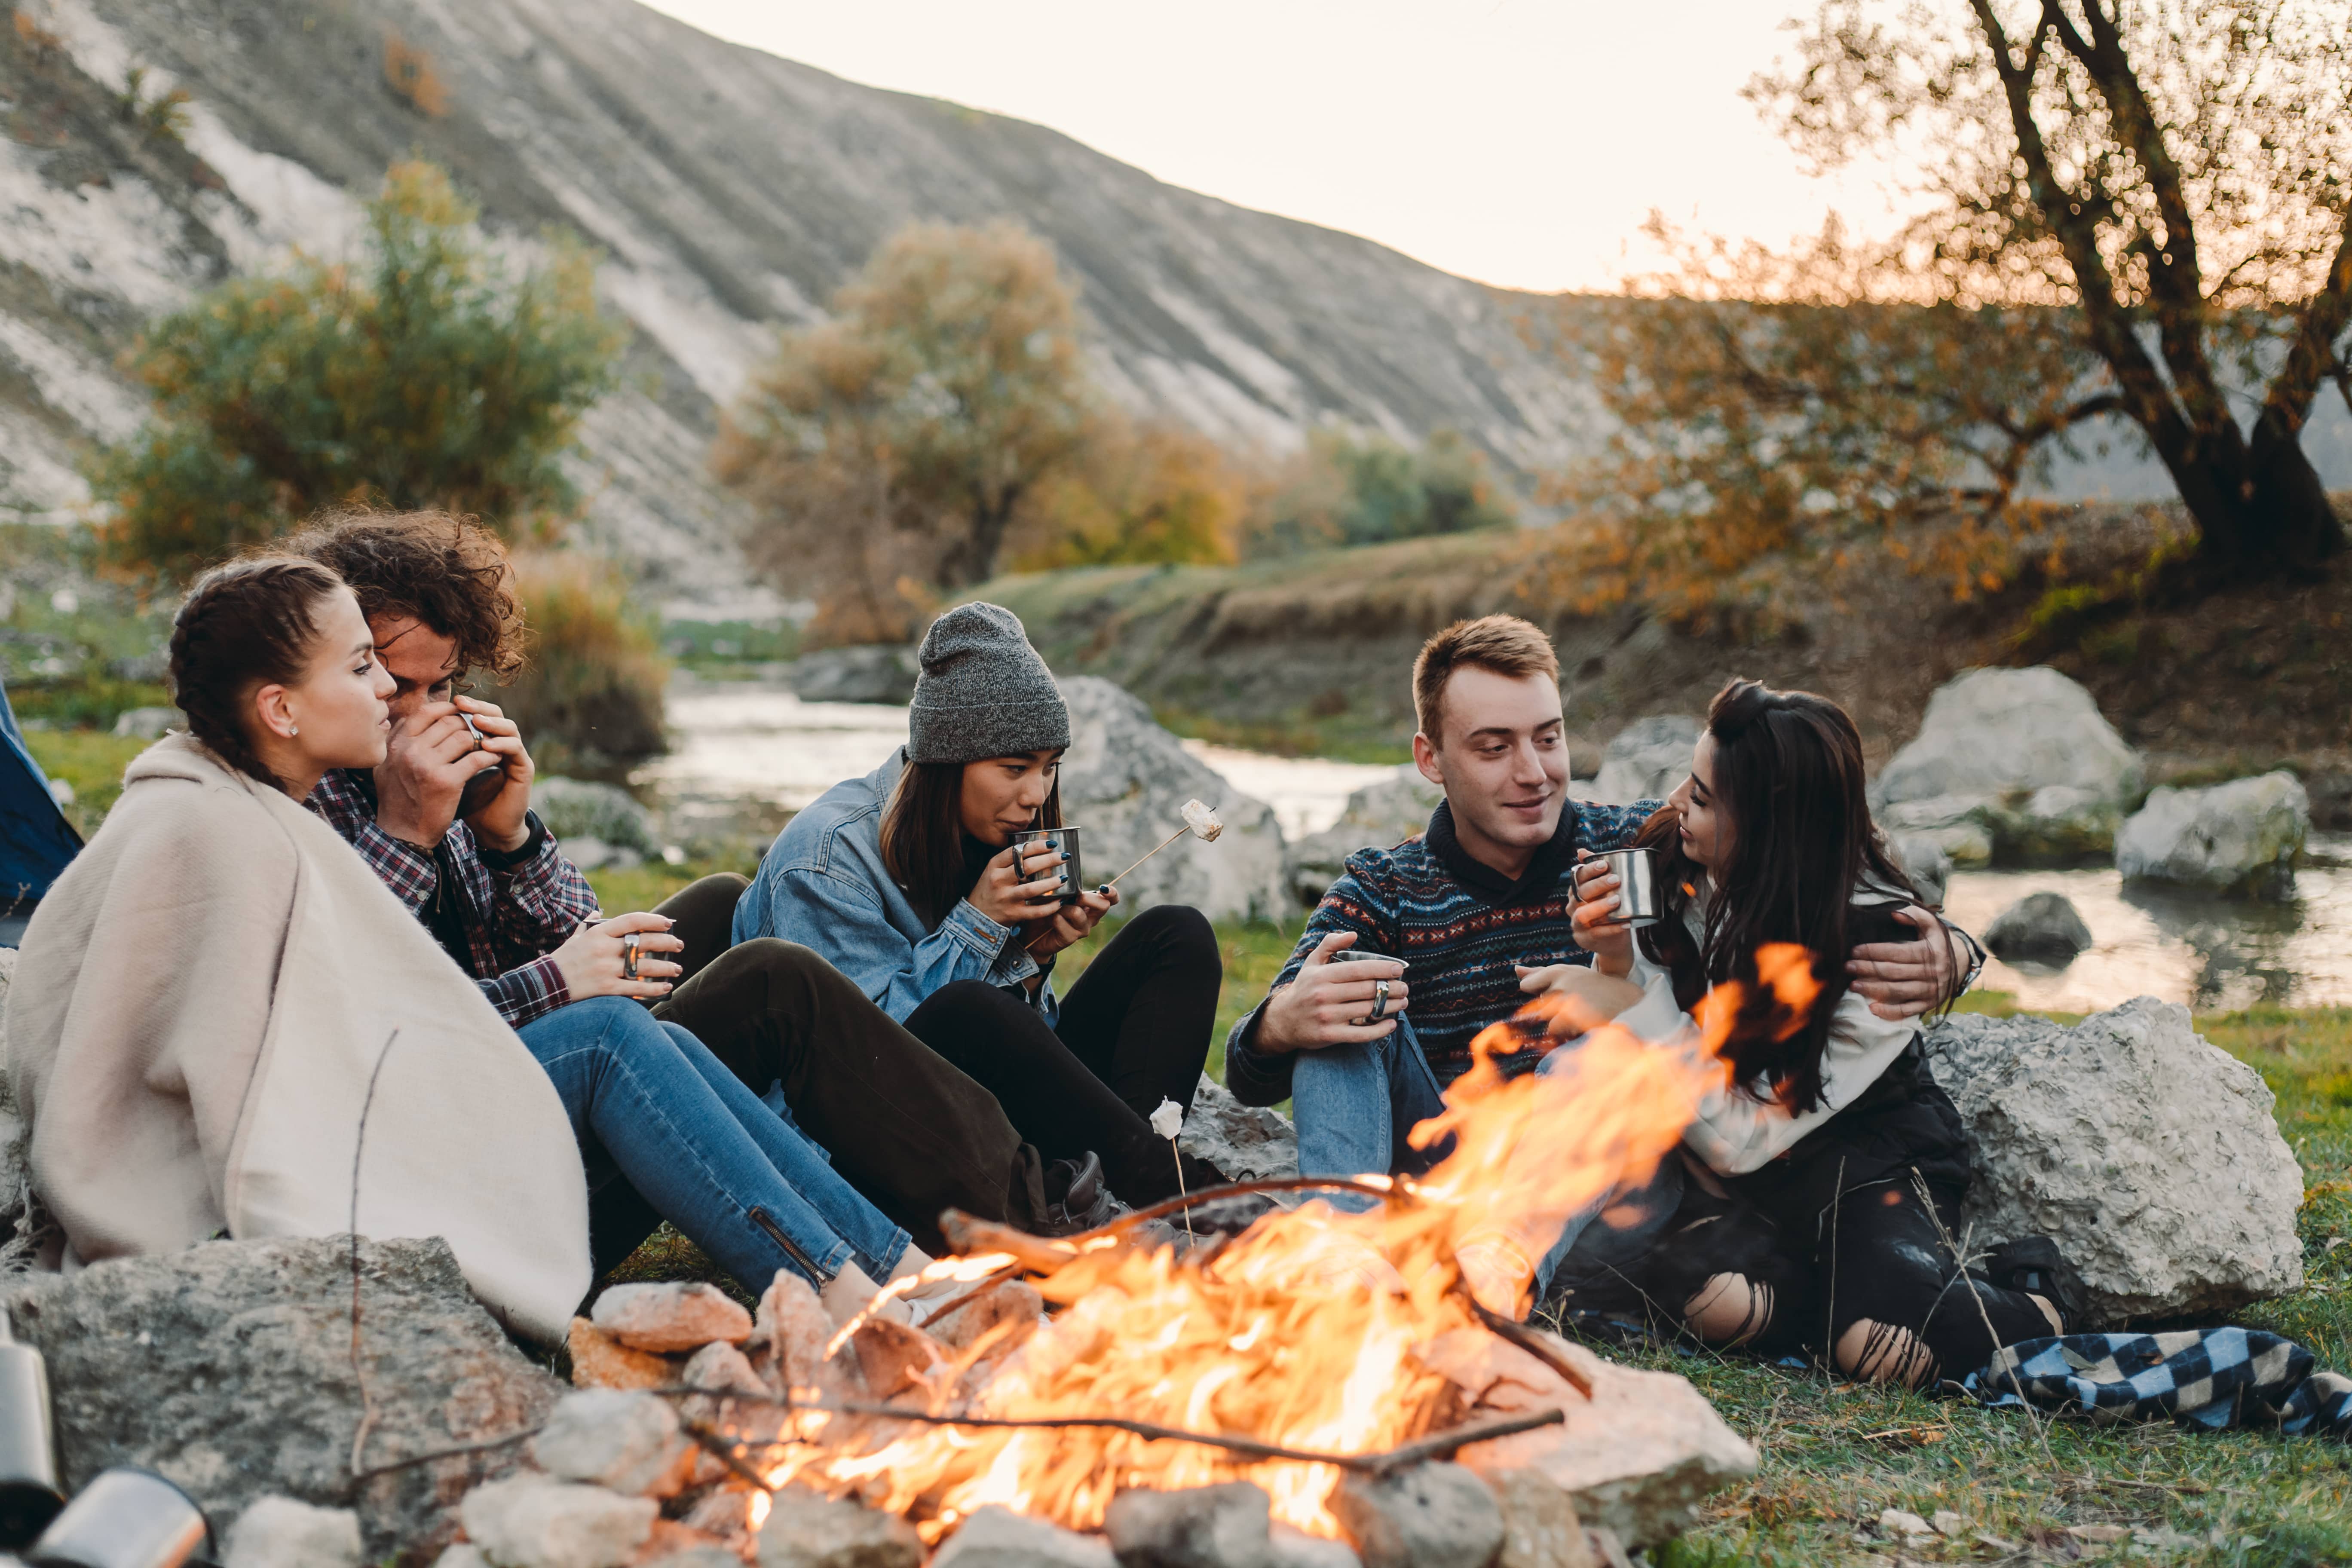 Friends around campfire by the river.